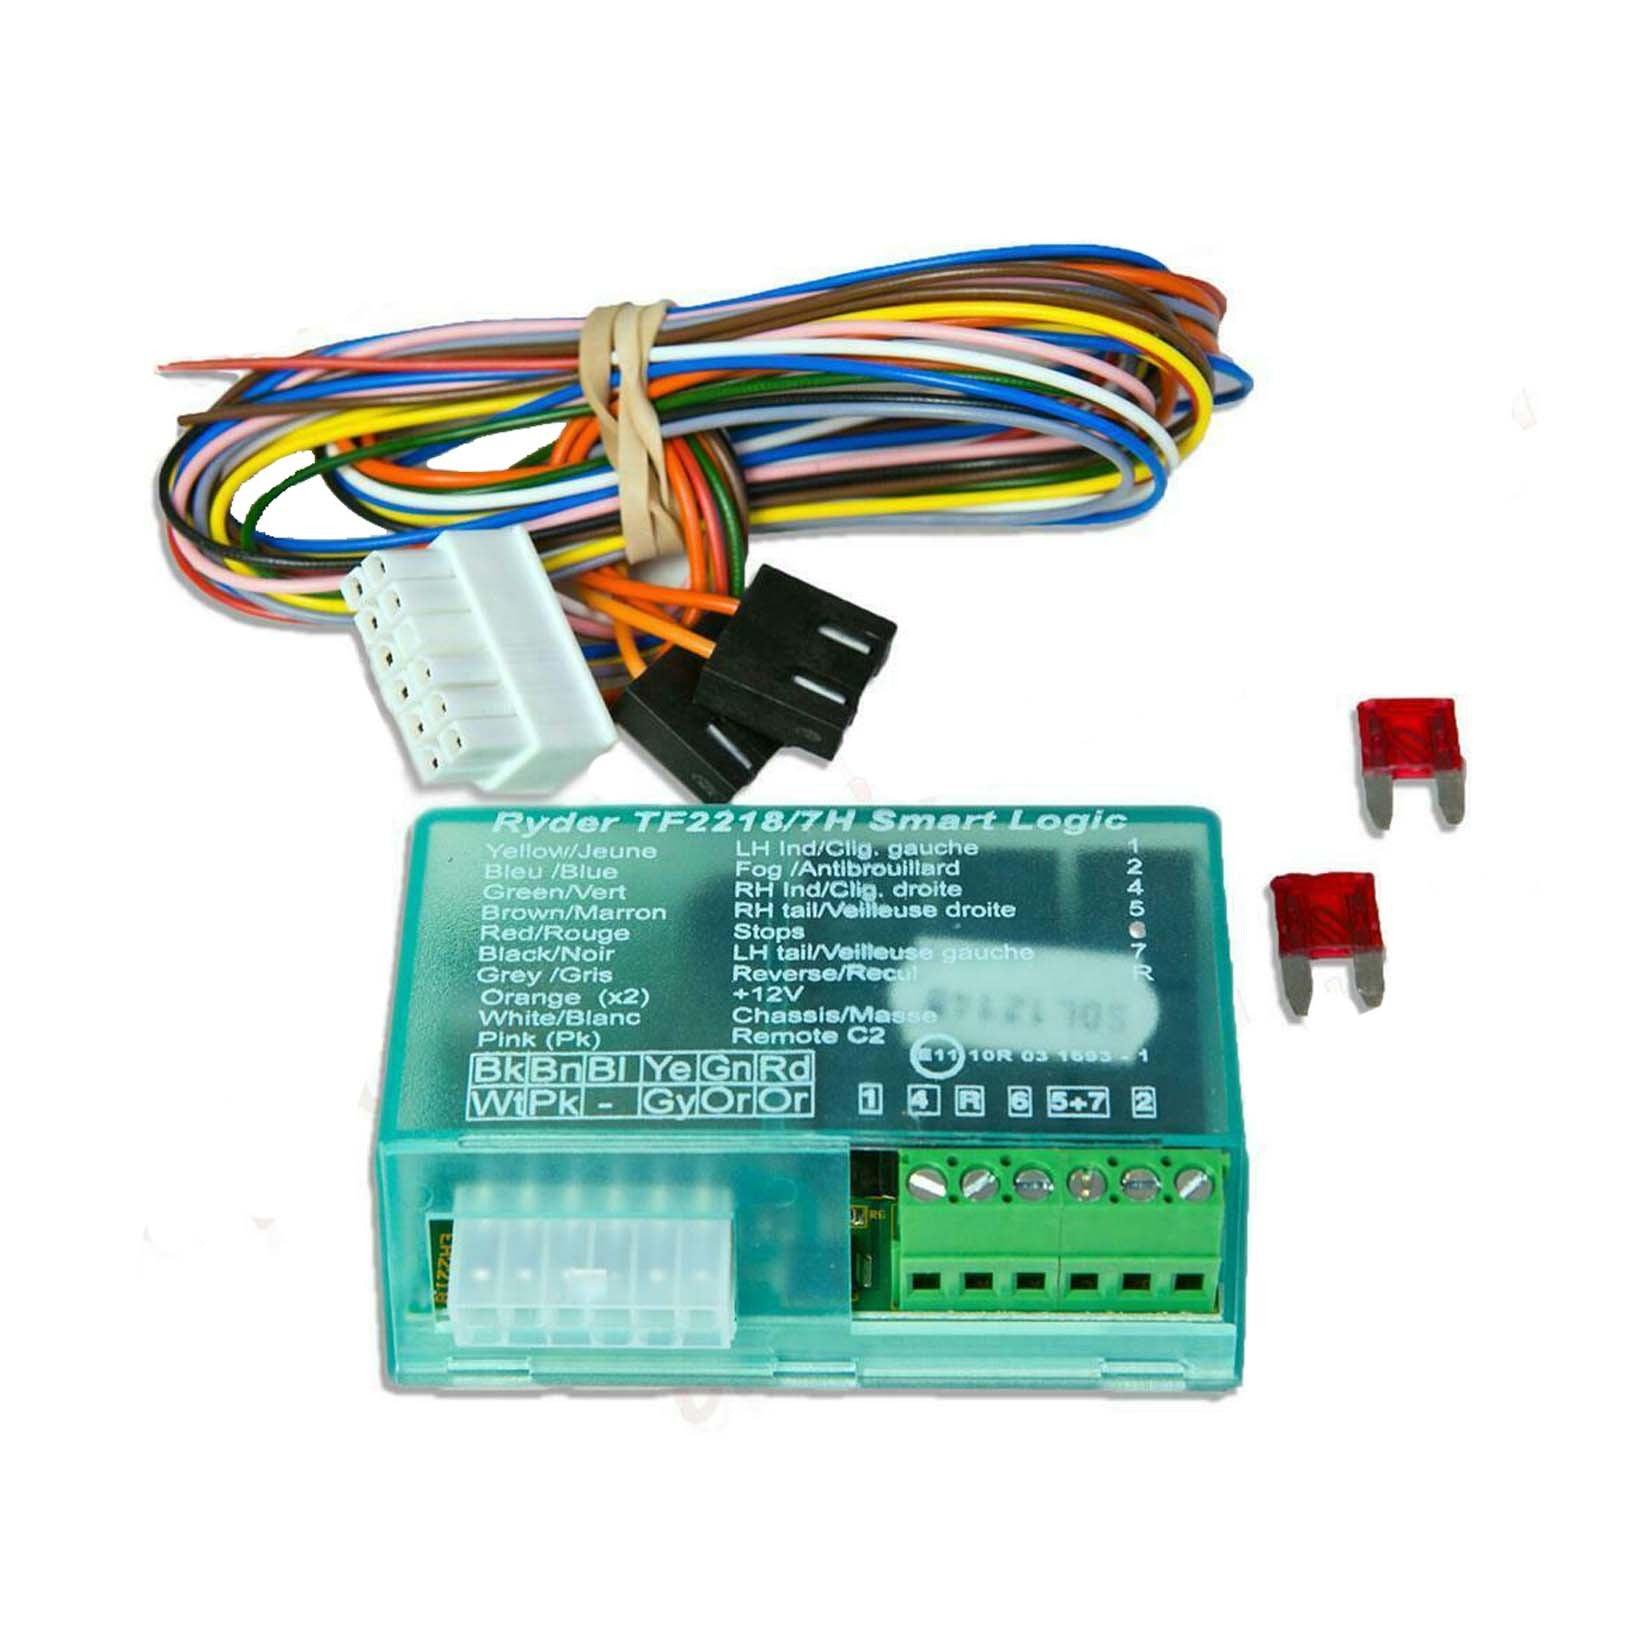 TOWBAR 7 WAY TOWING ELECTRIC BYPASS RELAY WIRING KIT - UNIVERSAL - Storm Xccessories2